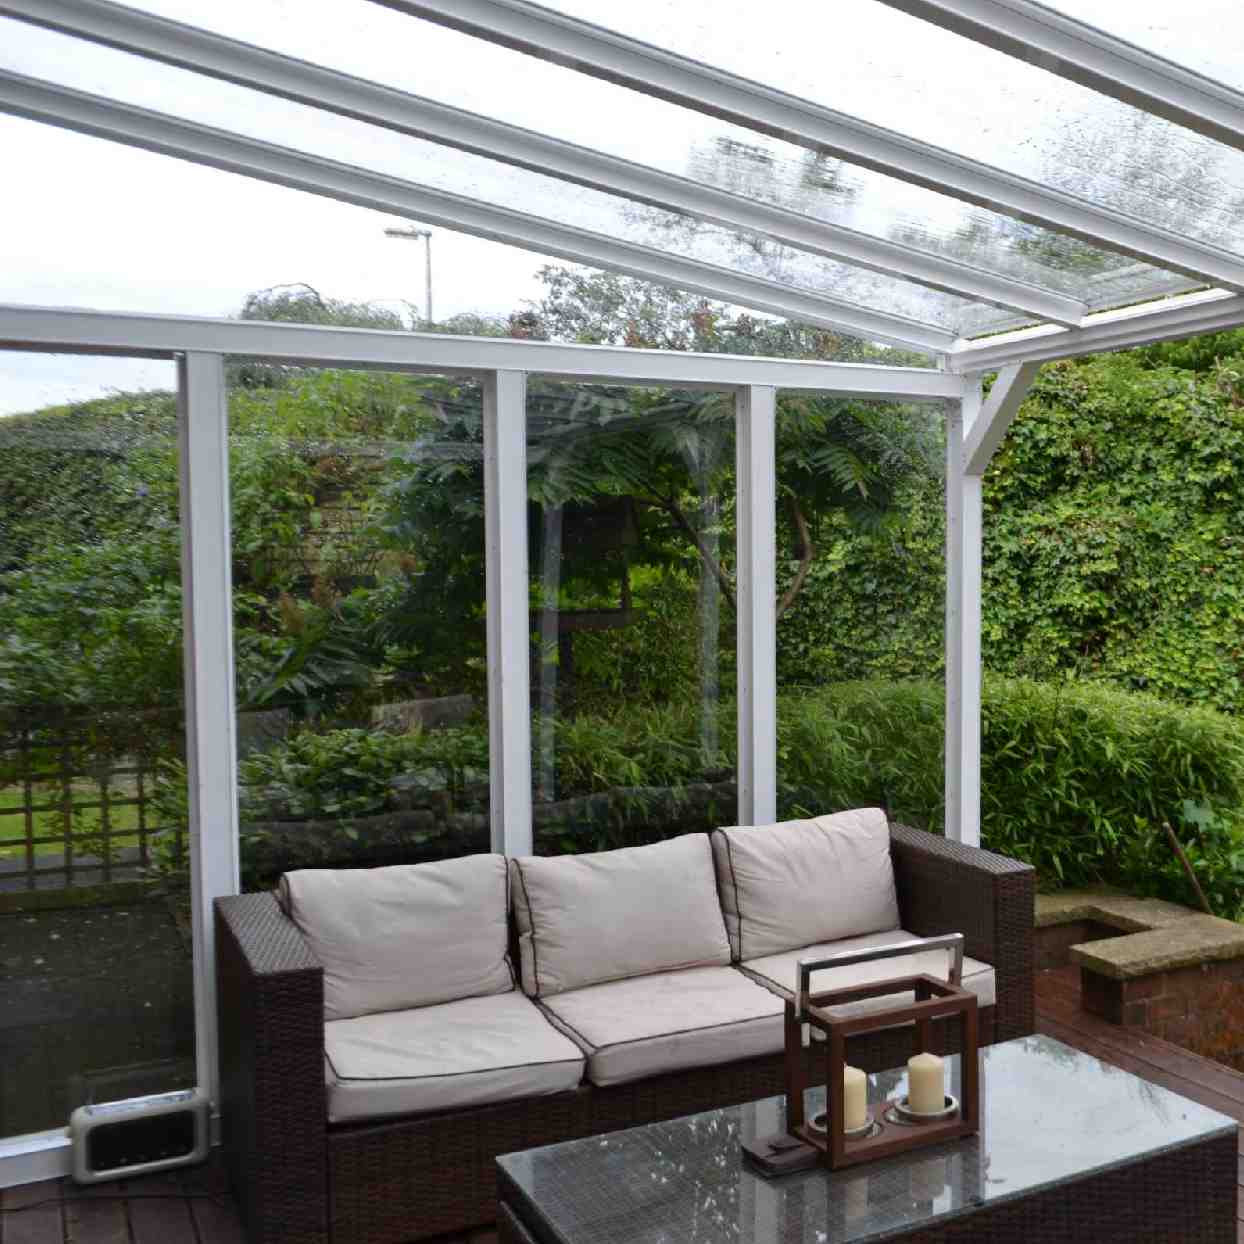 Buy Omega Verandah White with 6mm Glass Clear Plate Polycarbonate Glazing - 2.1m (W) x 3.5m (P), (2) Supporting Posts online today